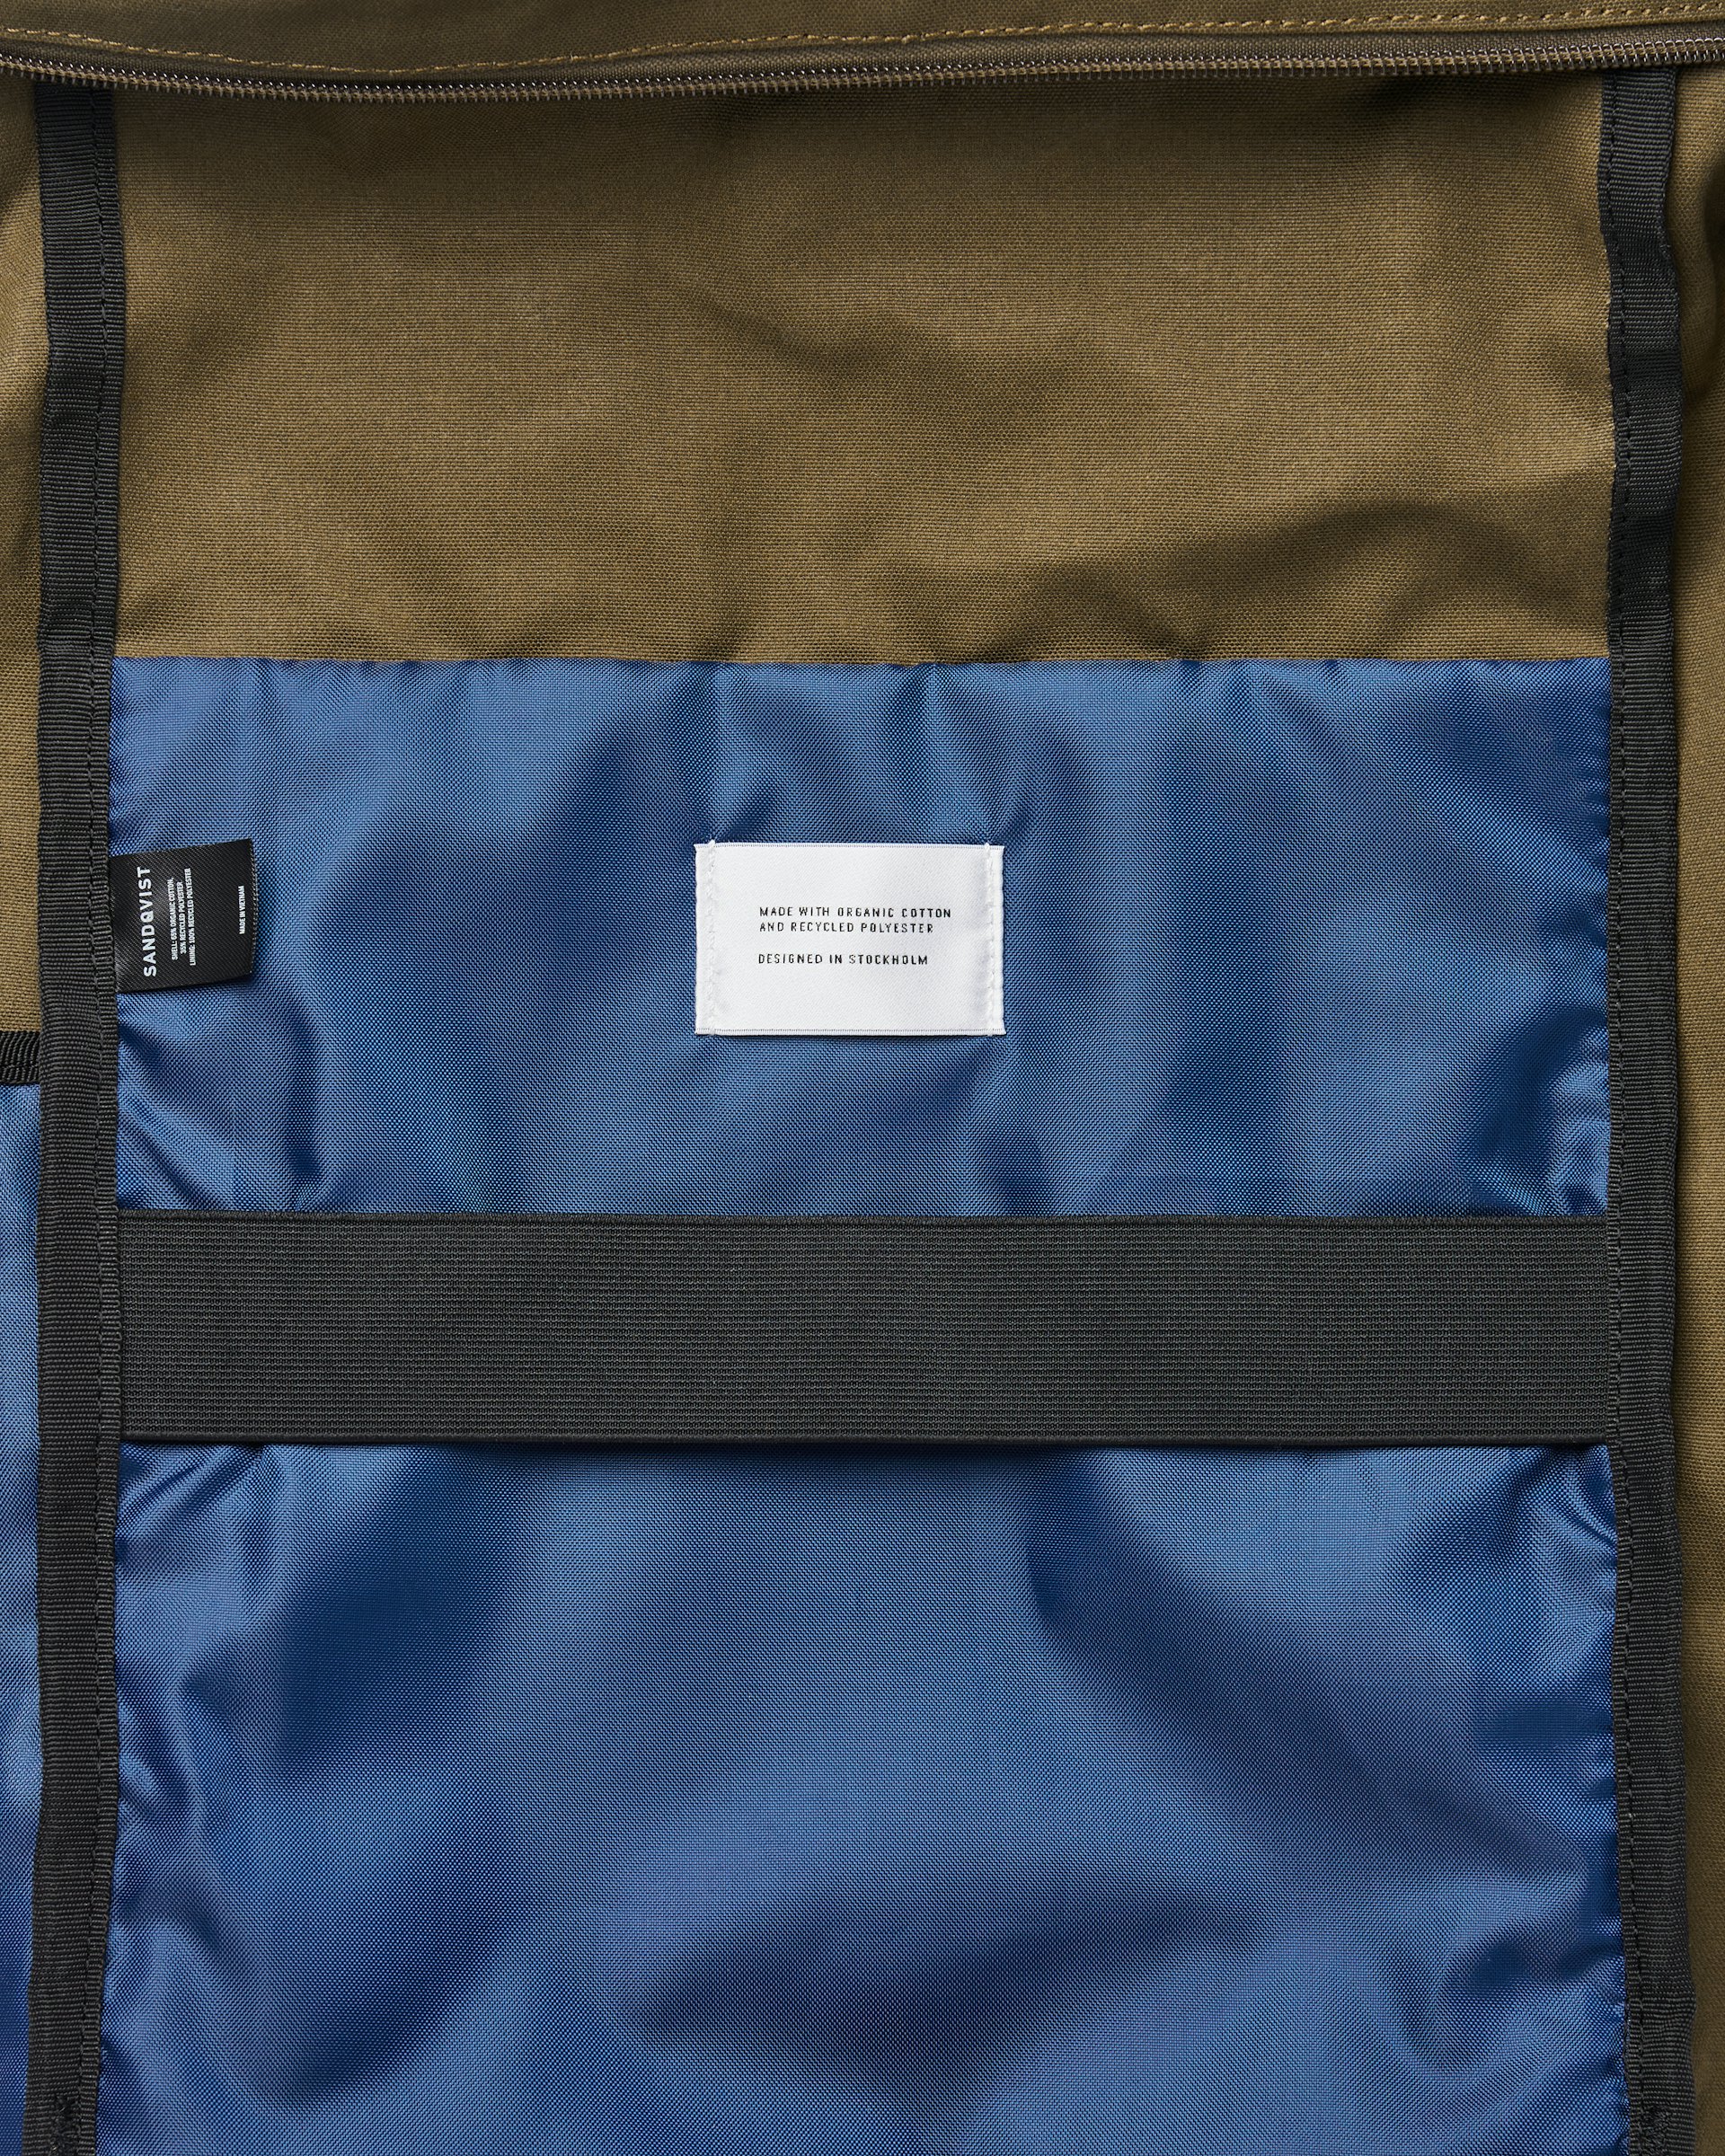 Kaj belongs to the category Backpacks and is in color olive (4 of 4)